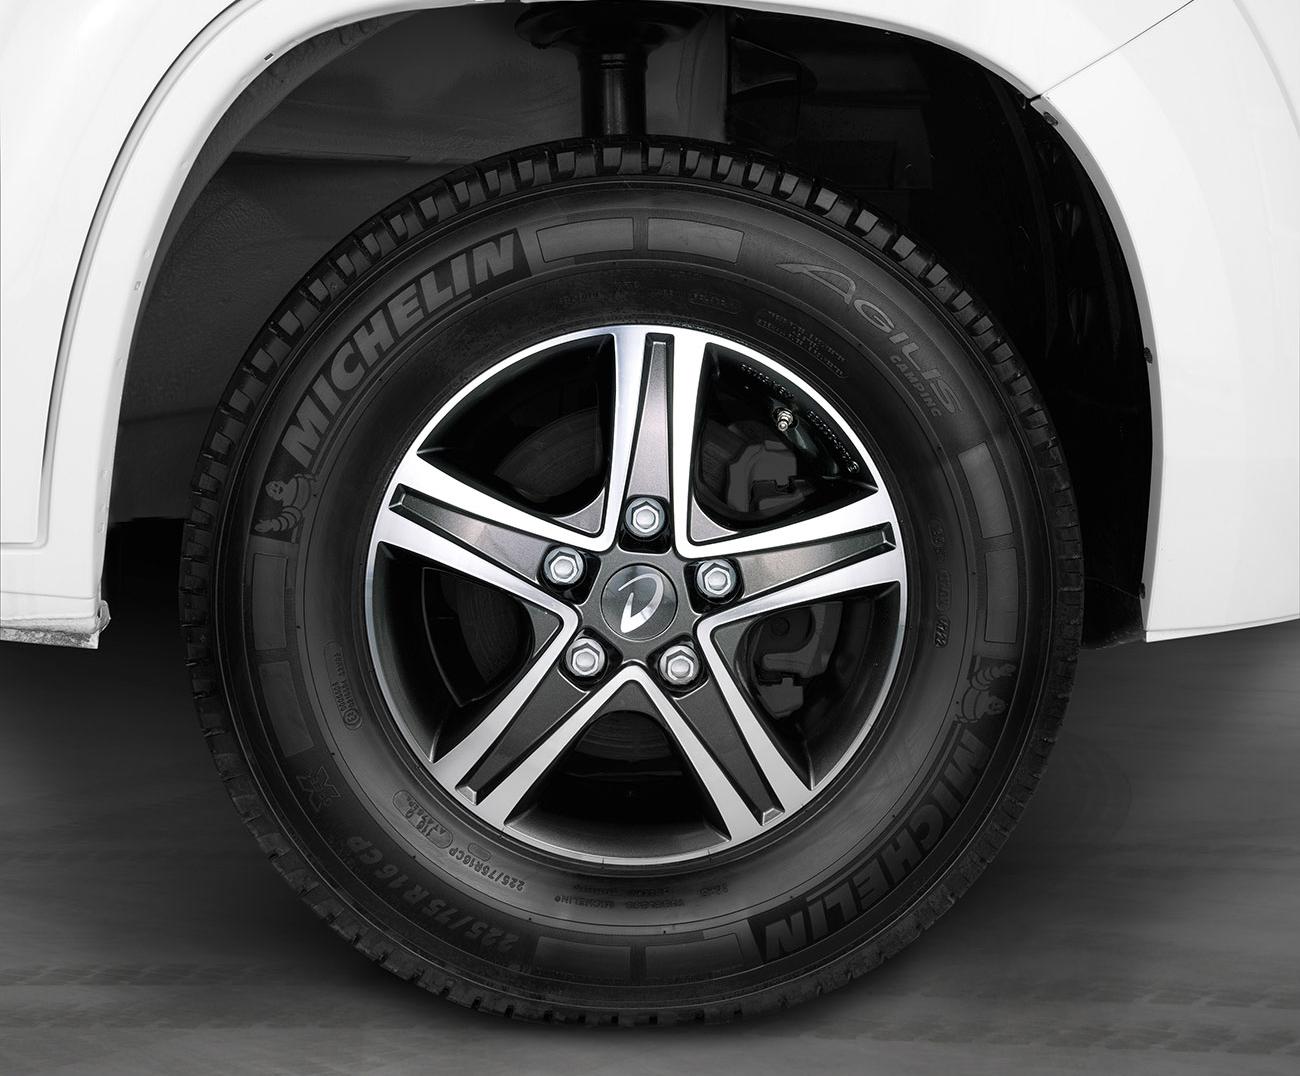 The stylish alloy wheels are included as standard.